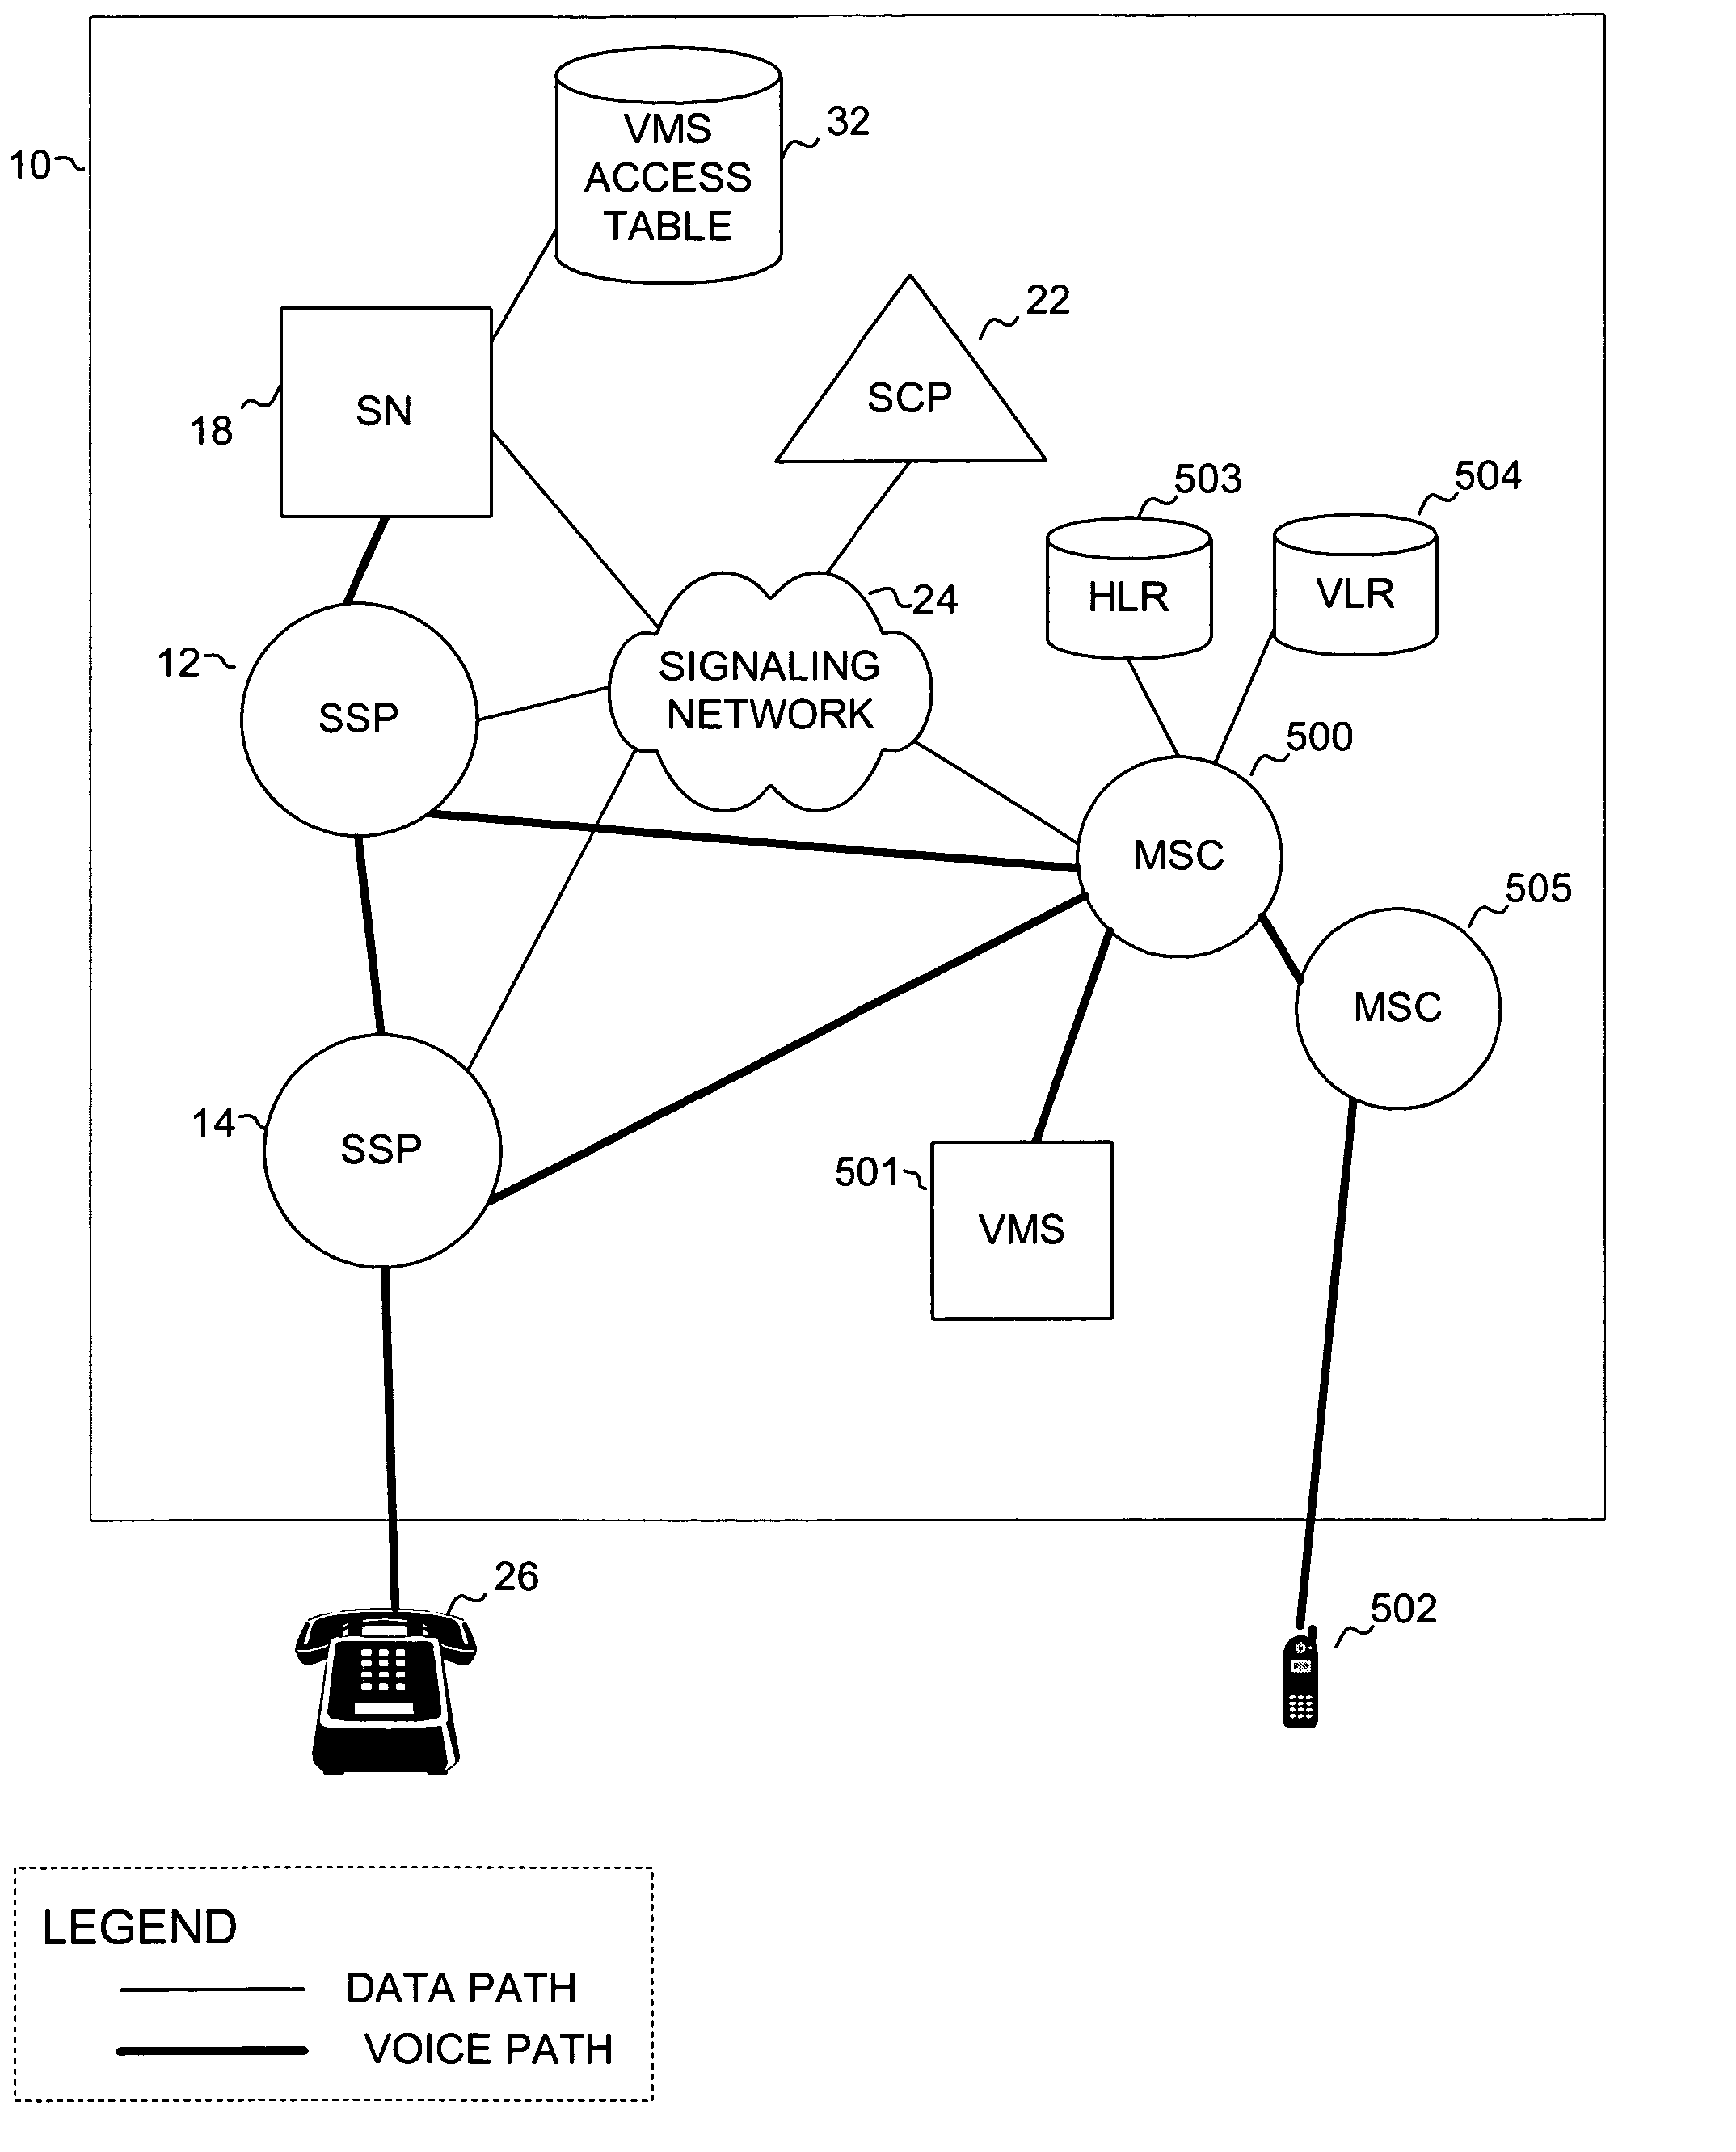 Method and system for screening calls during voicemail messaging